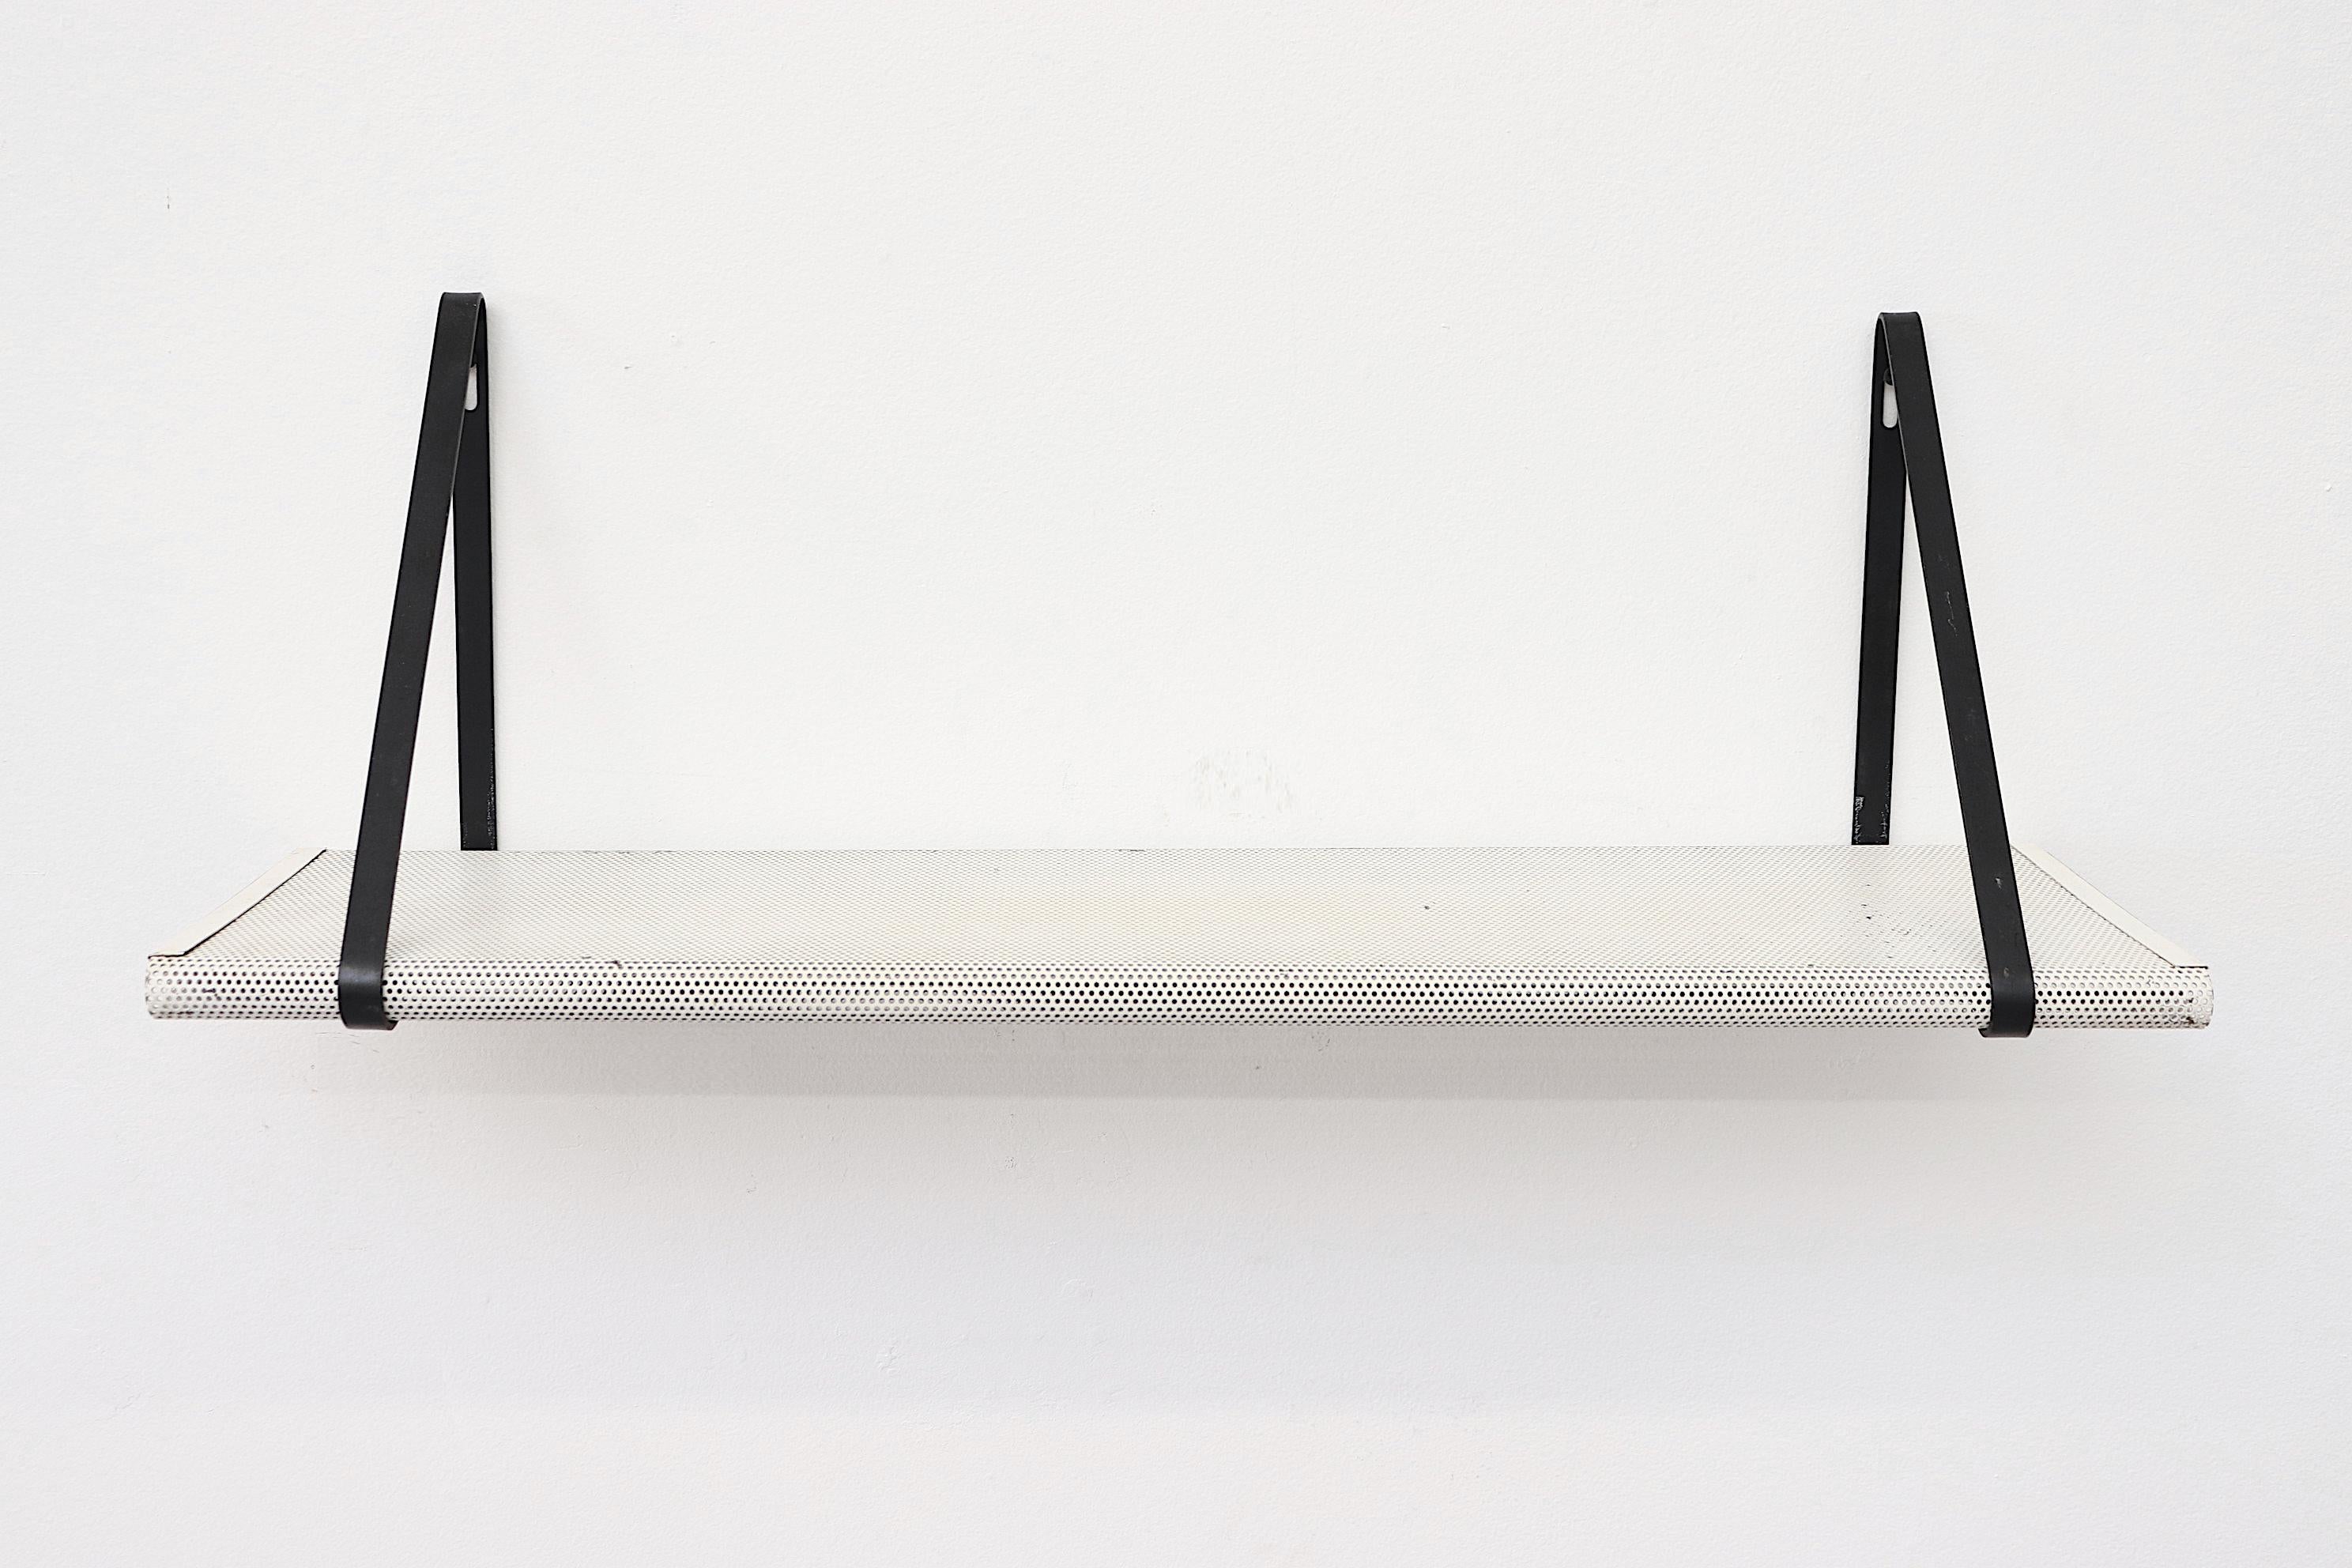 Made in the 1950s and 1960s, this a rare Mathieu Mategot wall-mounted Industrial book shelf is constructed of white enameled perforated sheet metal with black metal key-slotted band mounts. In original condition with visible wear and some enamel